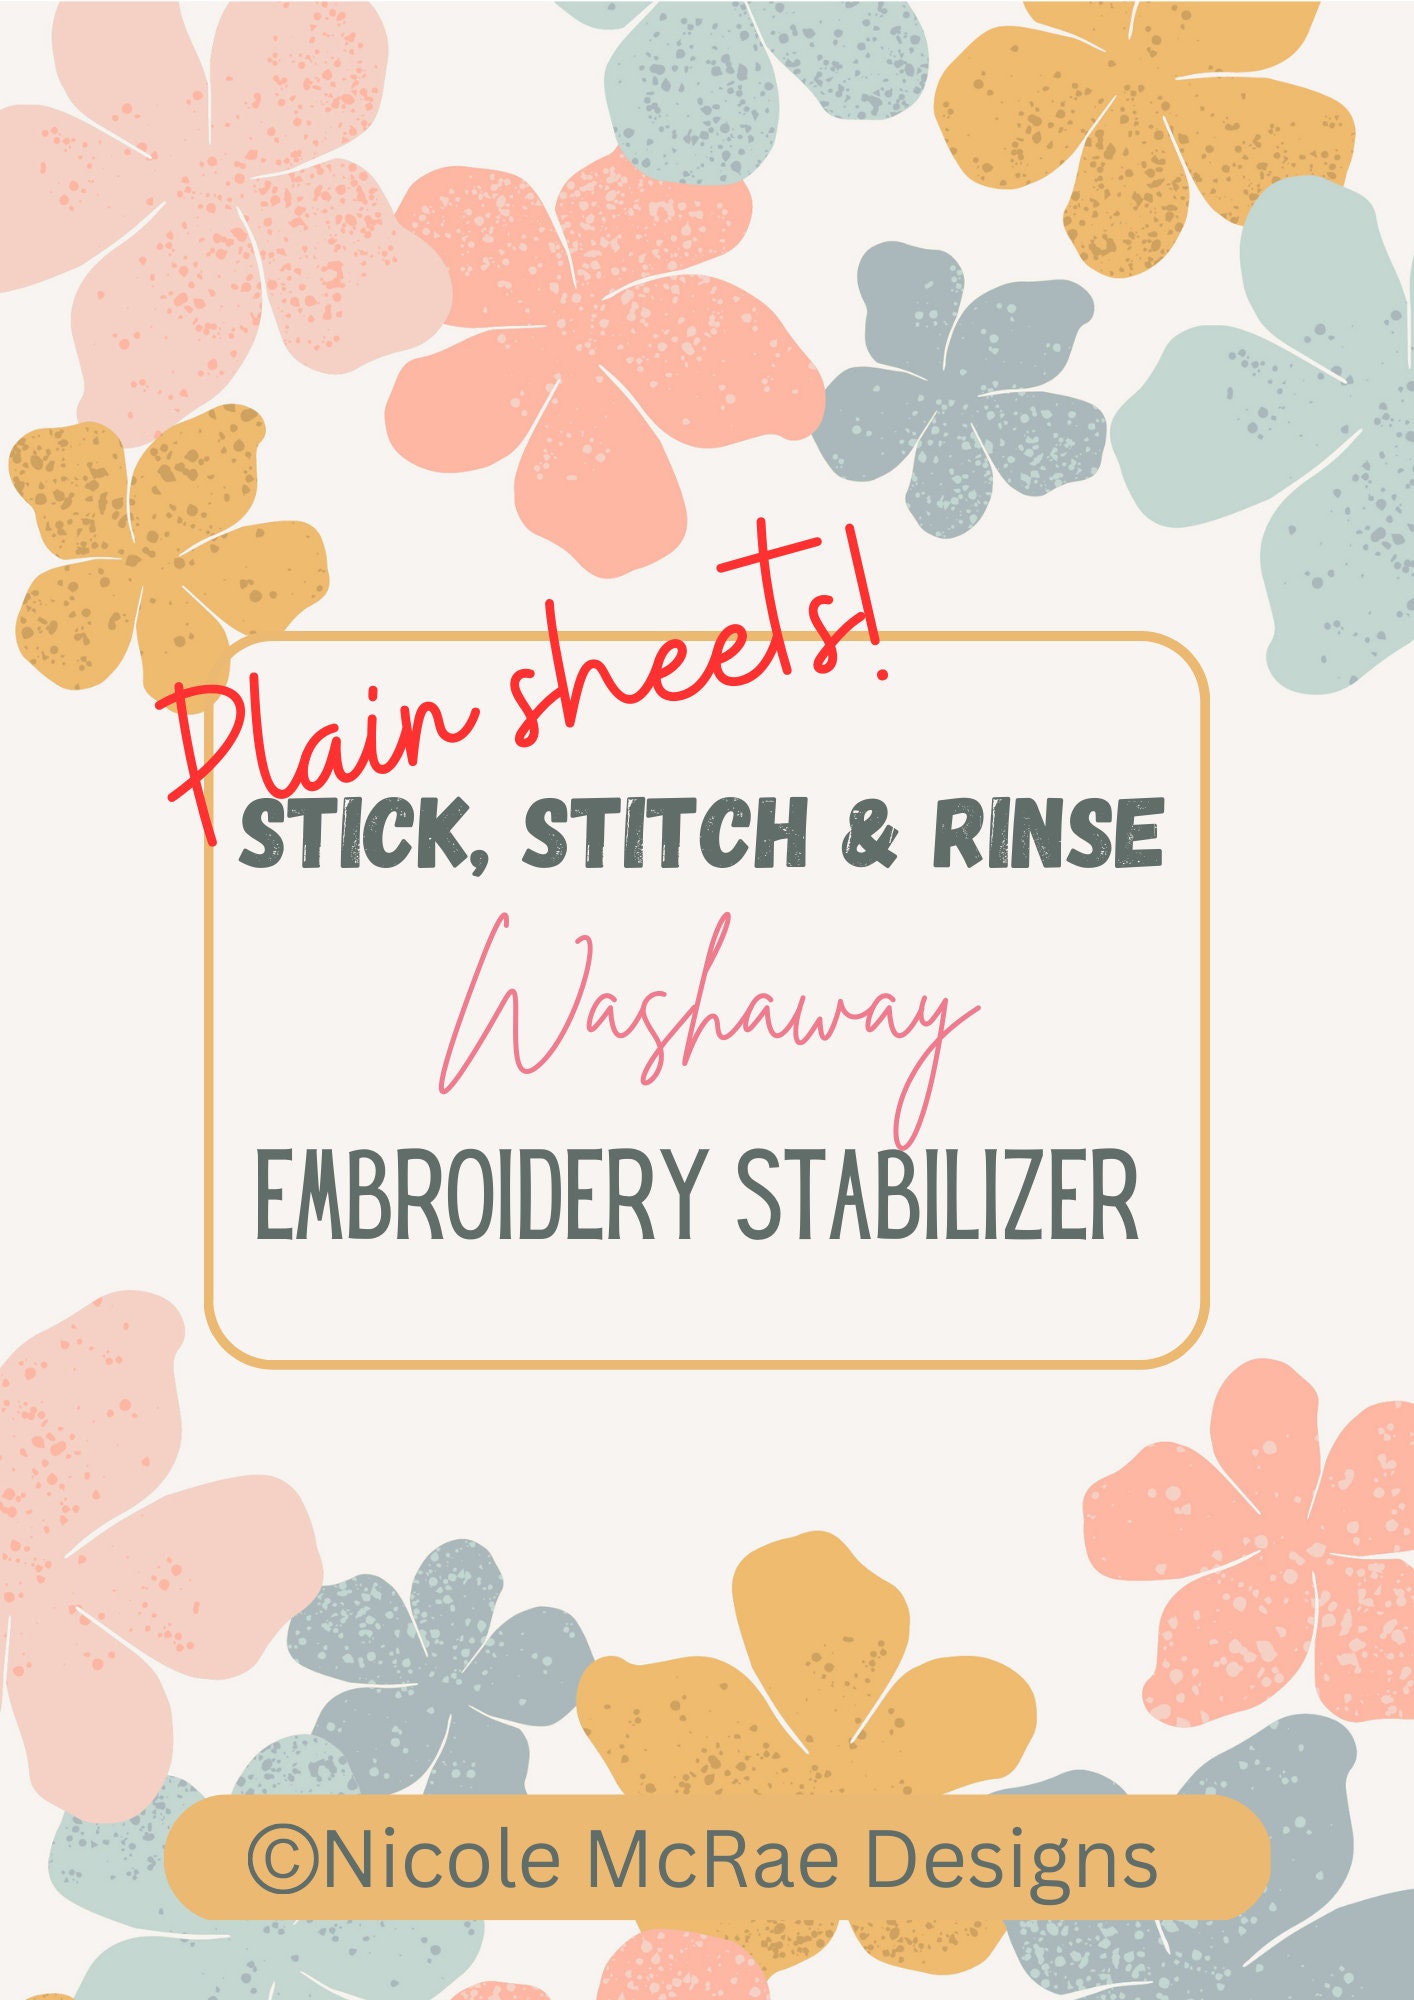 STICK AND STITCH Washaway Embroidery Stabilizer Pack 7 Wildflower Designs  Rinse With Water Embroidery Backing Interfacing 